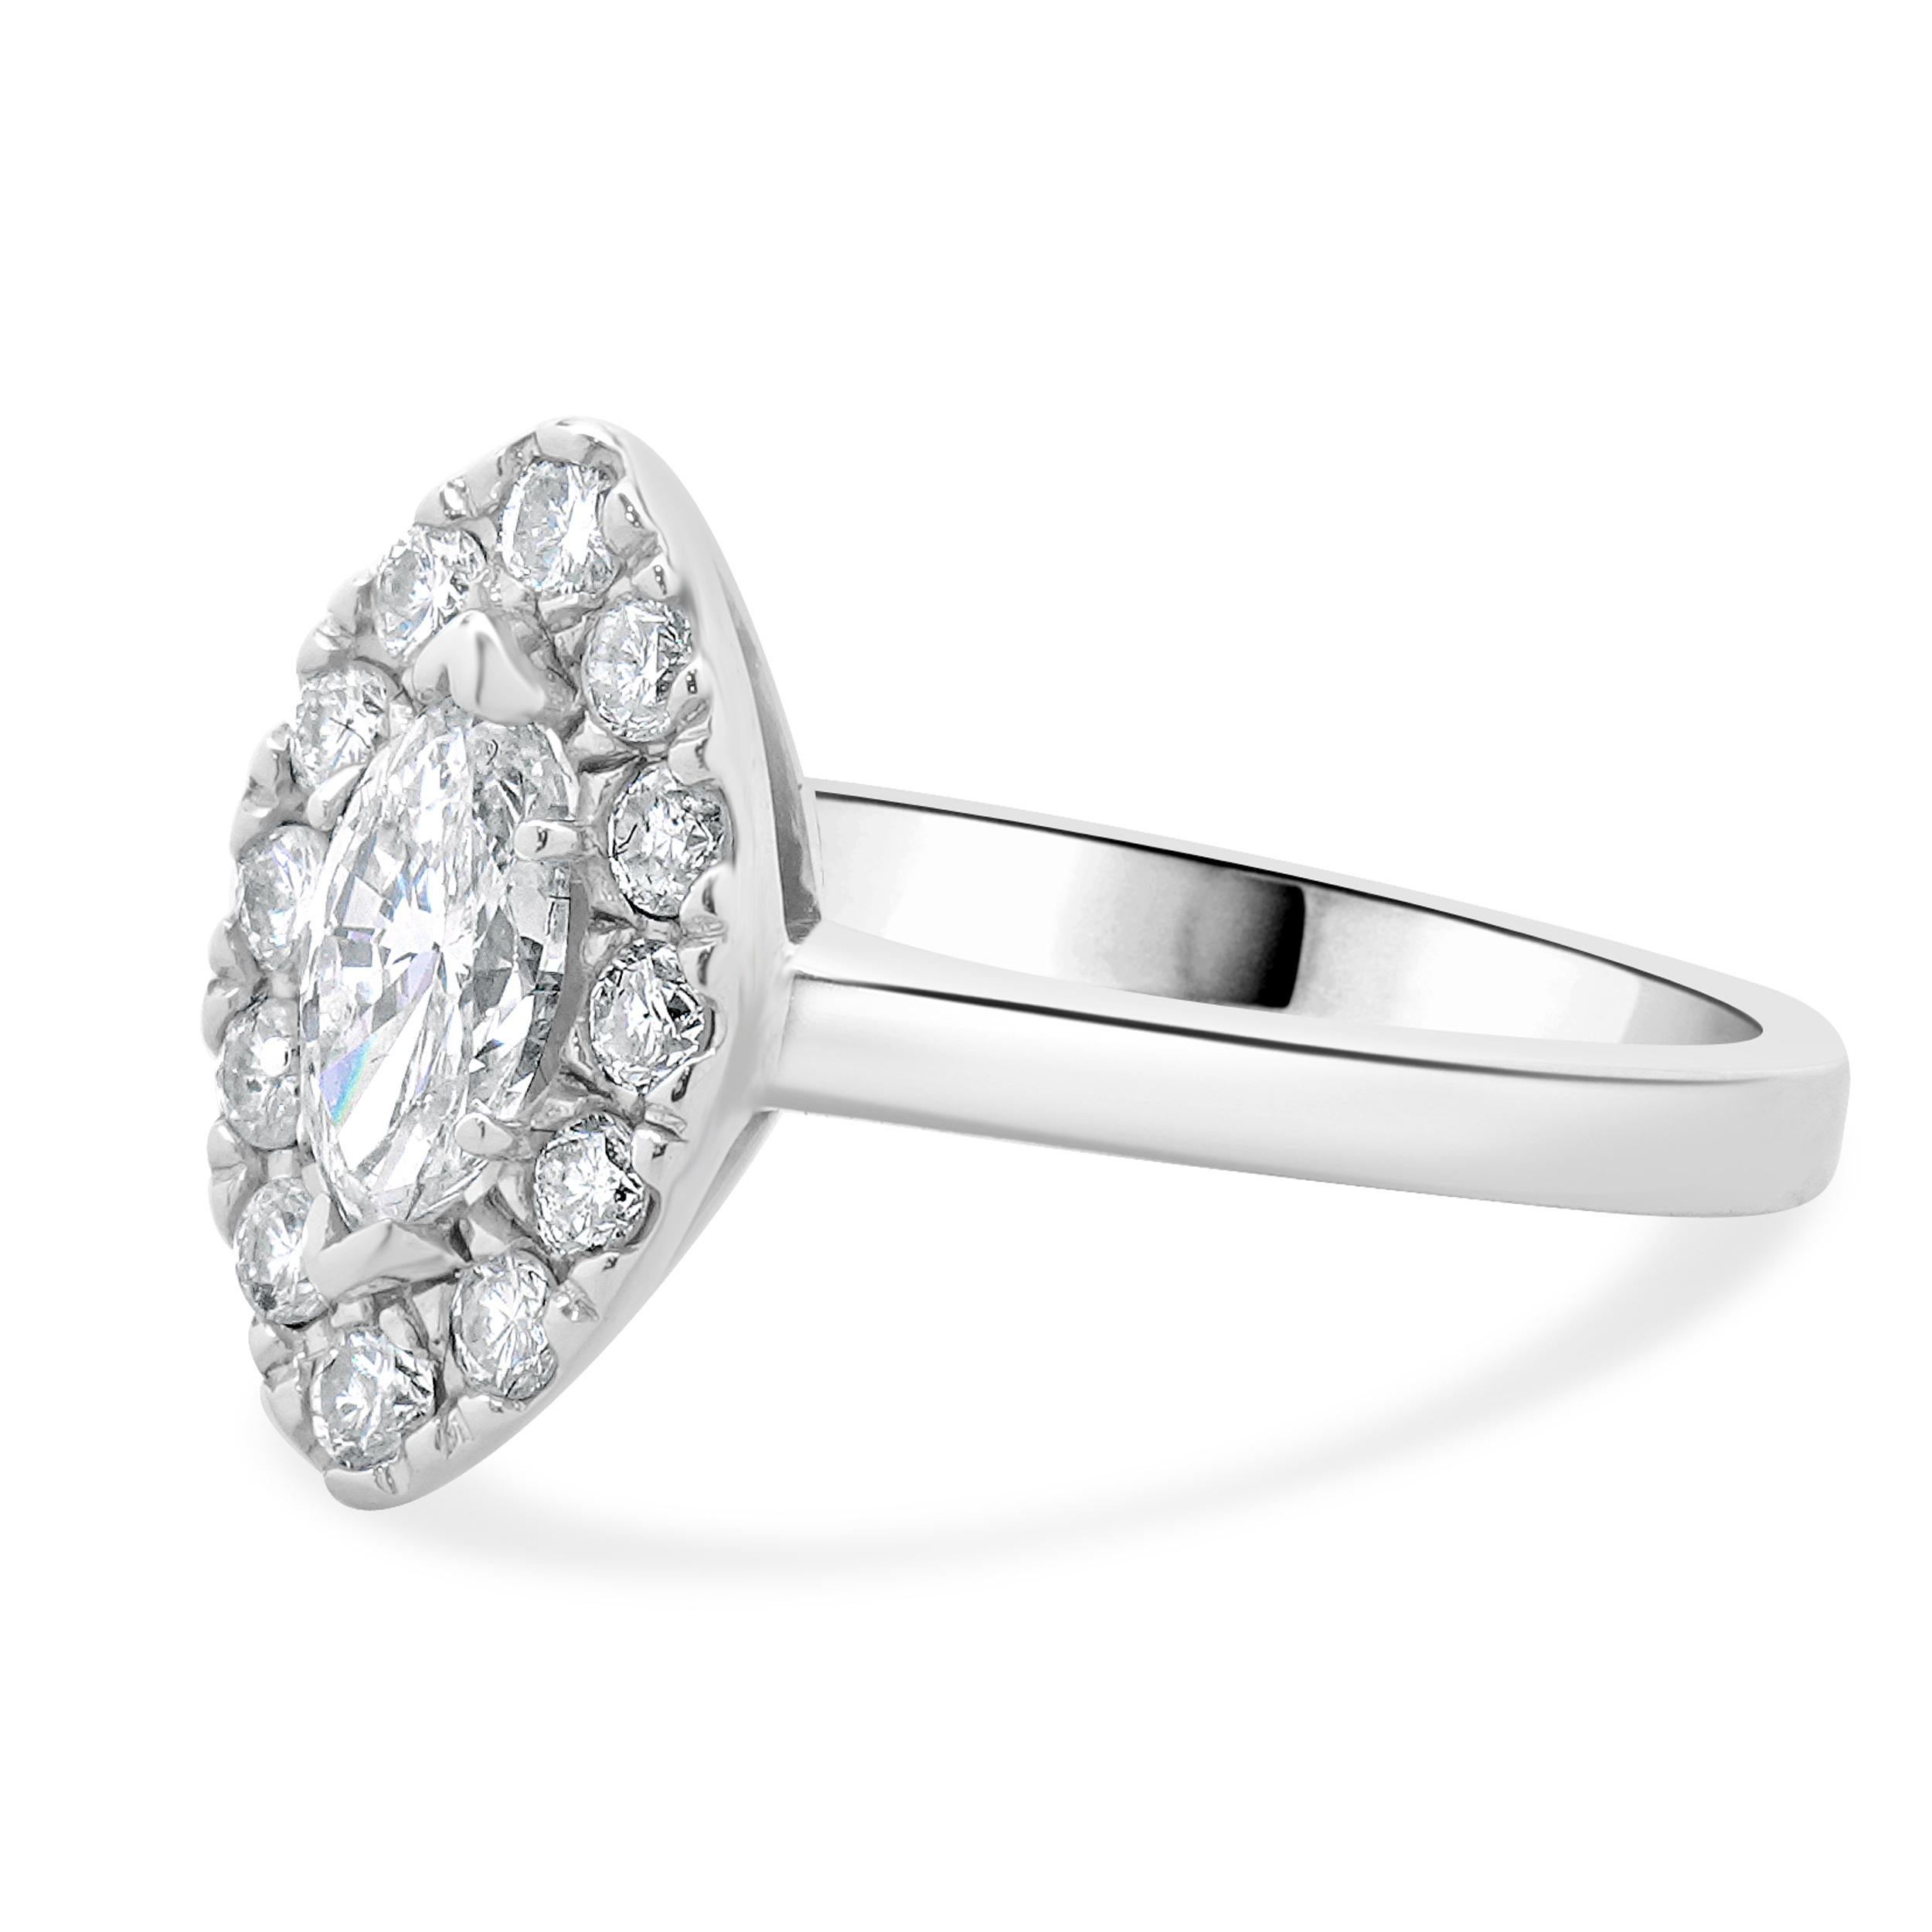 Designer: custom
Material: 14K white gold
Center Diamond: 1 marquise cut = 0.50ct
Color : F/G
Clarity : SI1
Diamond: 12 round brilliant cut = 0.25cttw
Color : G
Clarity : SI1
Dimensions: ring top measures 14mm
Size: 5.75 complimentary sizing